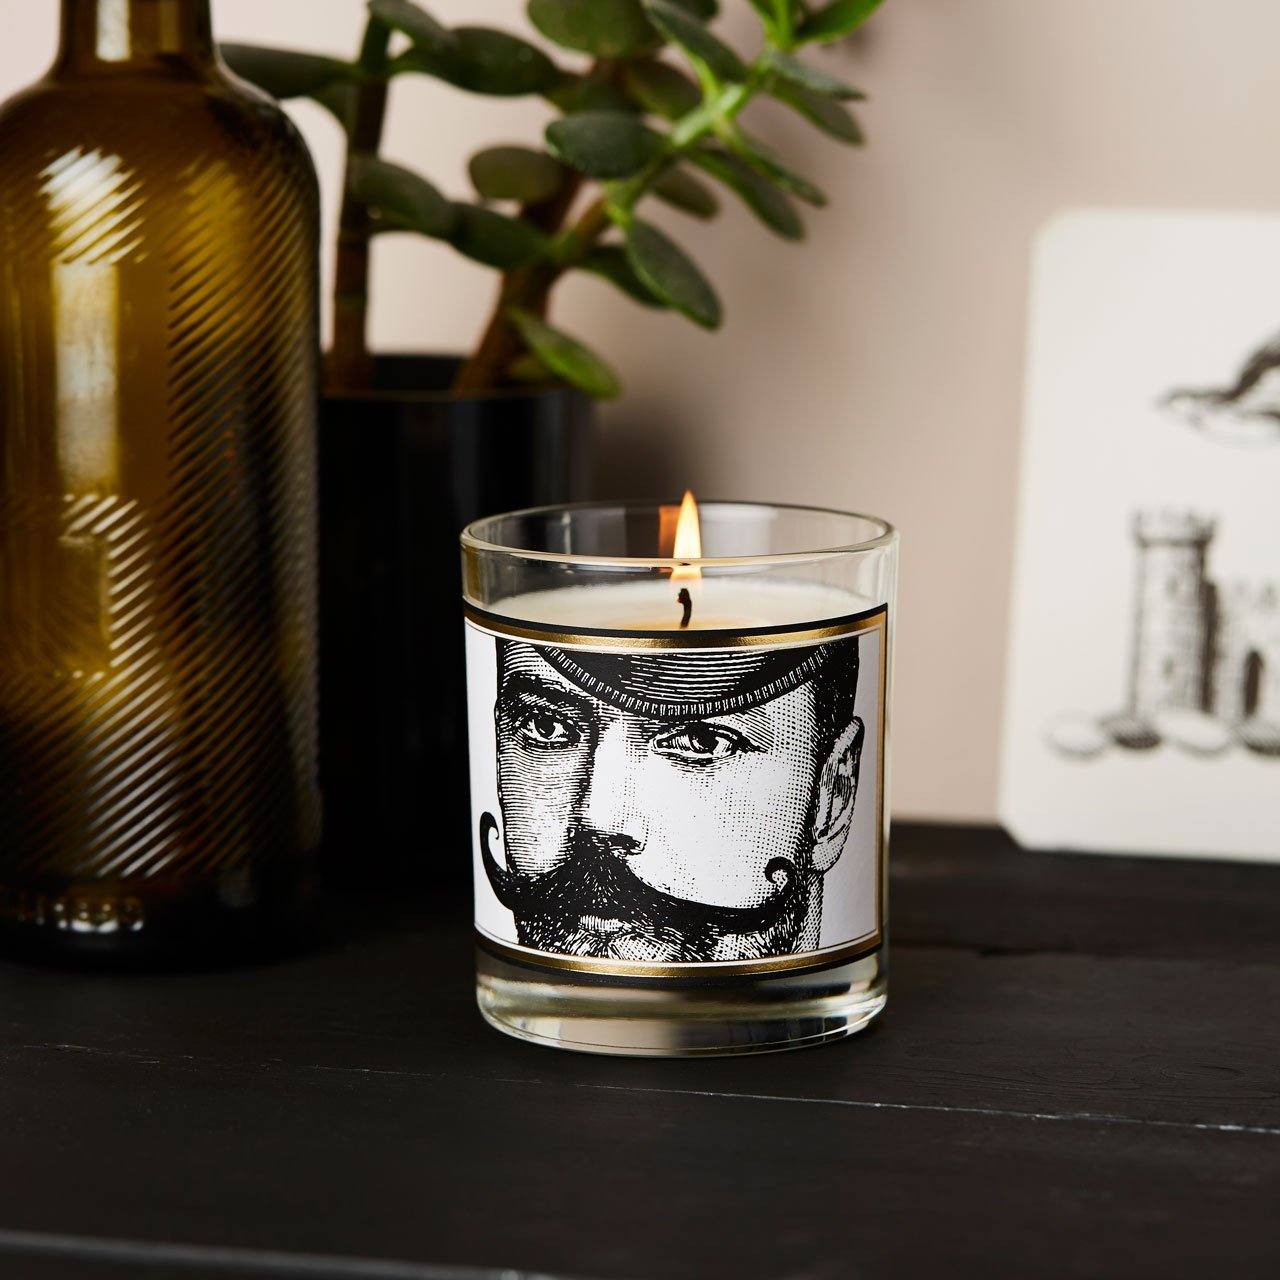 The Dashing Gent Glass Candle - Chase and Wonder - Proudly Made in Britain